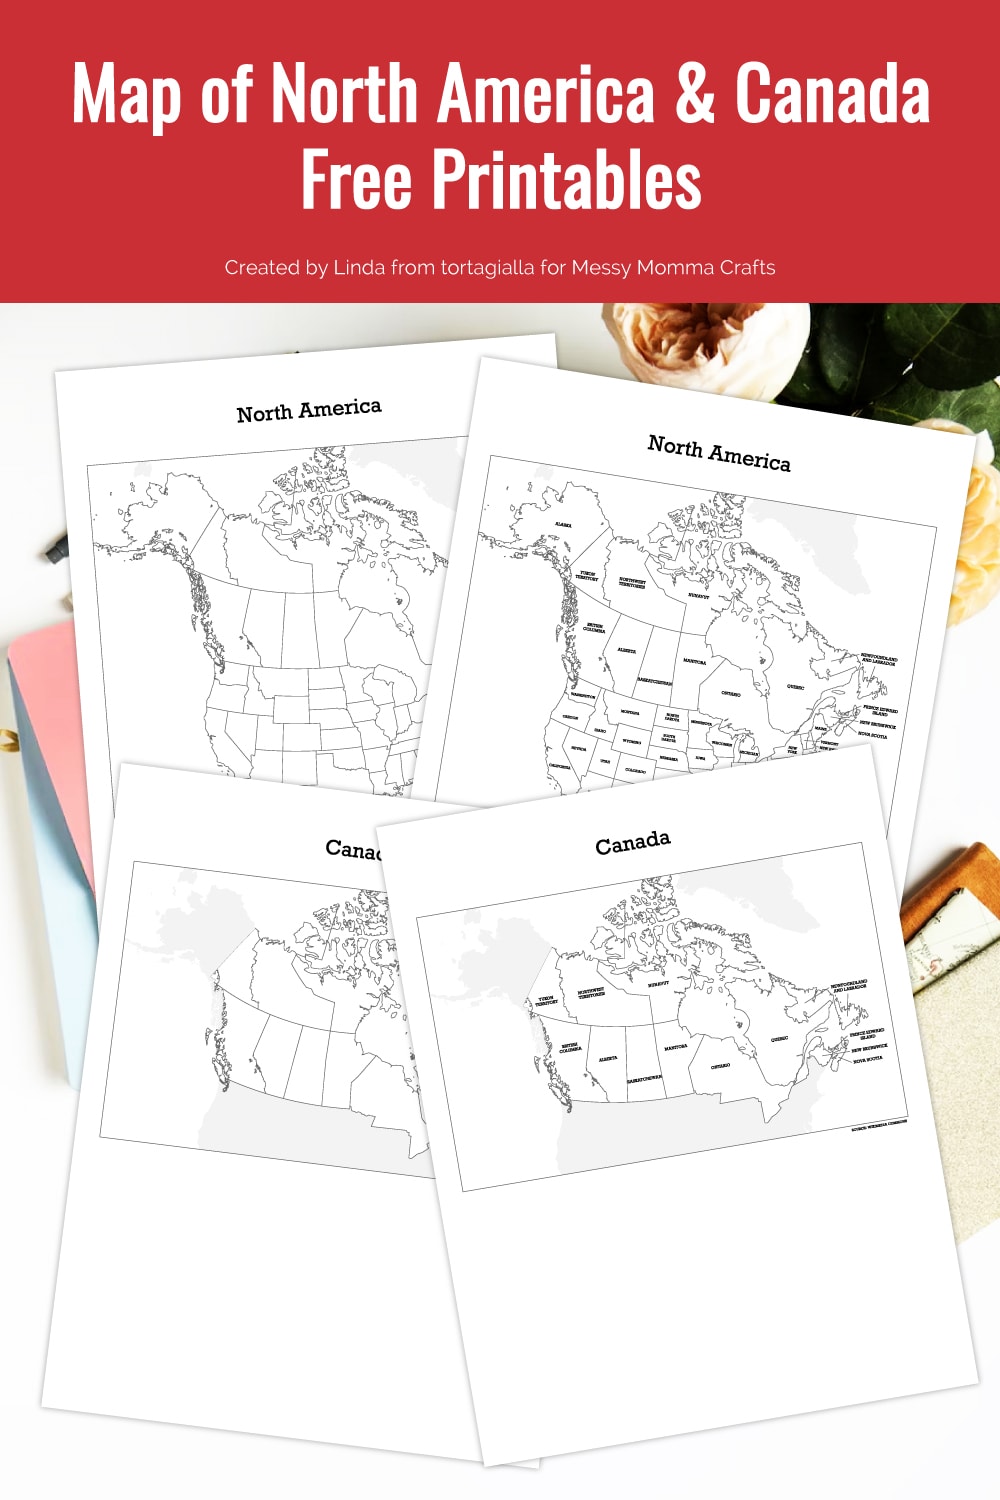 Preview of printable map pages of North America and Canada, unlabelled and labelled, on top of white desk with flowers in upper right hand corner and notebooks underneath. 